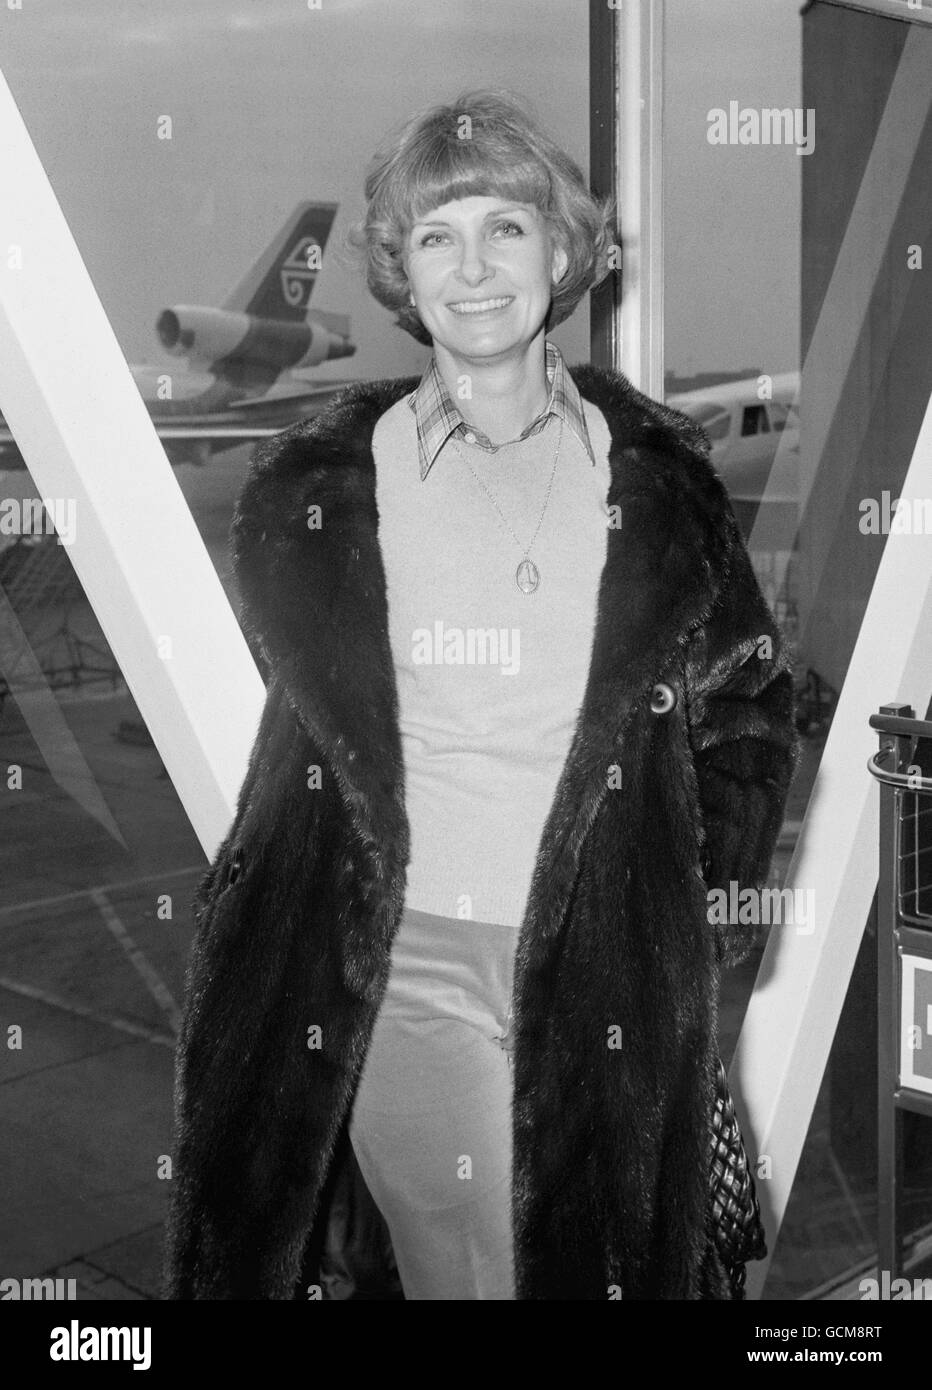 Joanne Woodward, actress wife of Paul Newman, at Heathrow Airport before returning to Washington for the inauguration of President Jimmy Carter. She has been in England for filming of the play, 'Come Back Little Sheba'. Stock Photo